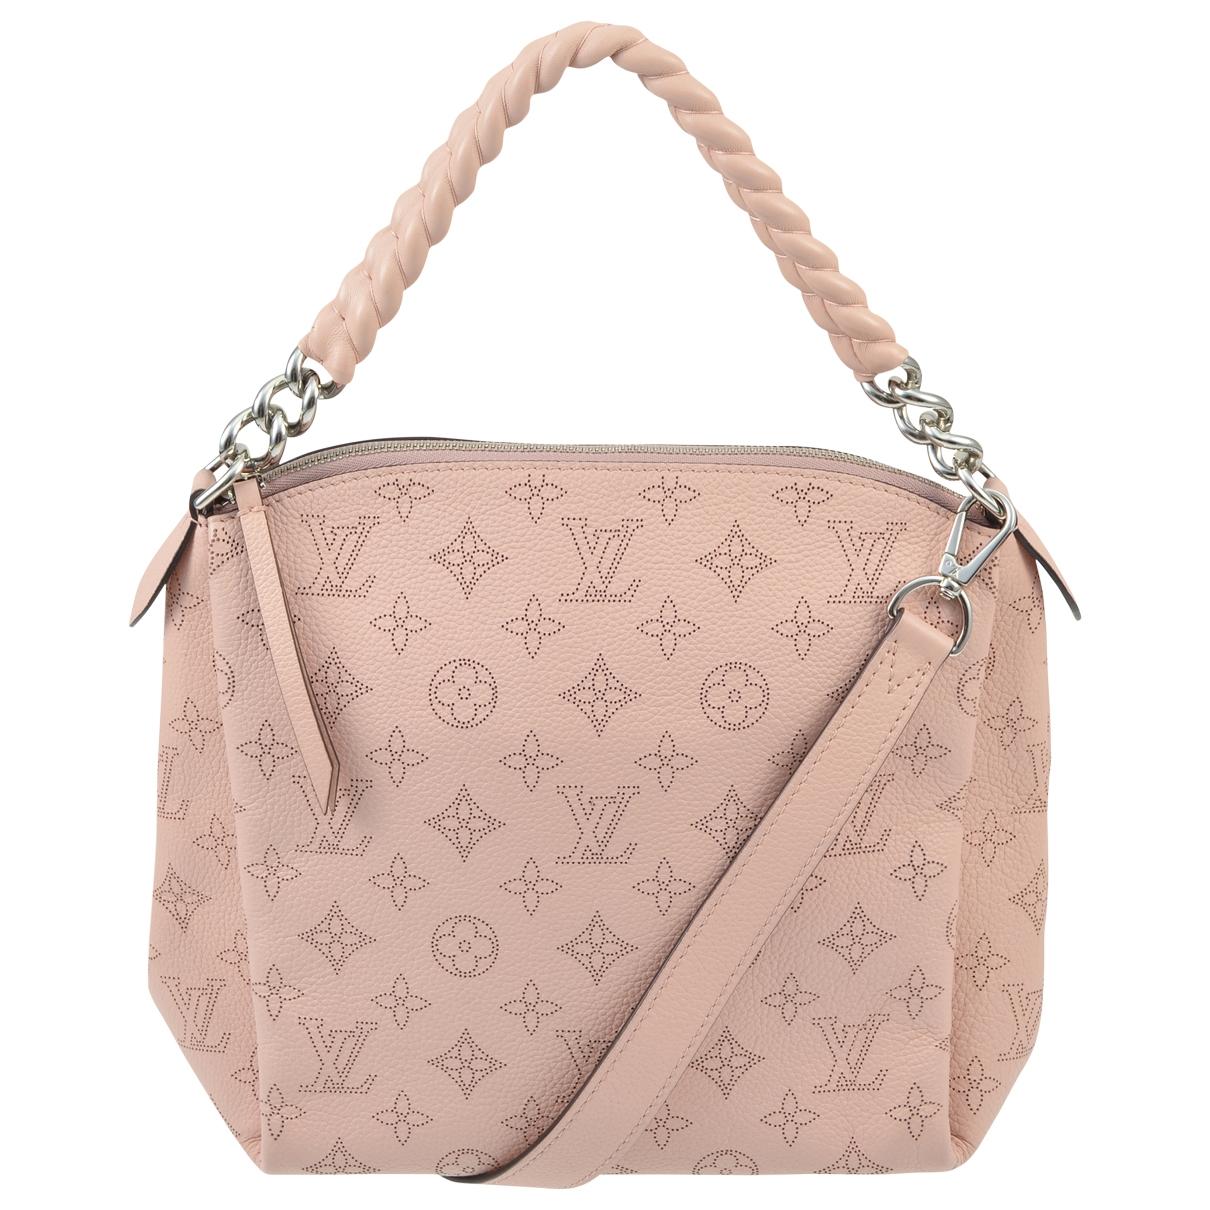 Lyst - Louis Vuitton Pre-owned Babylone Pink Leather Handbags in Pink